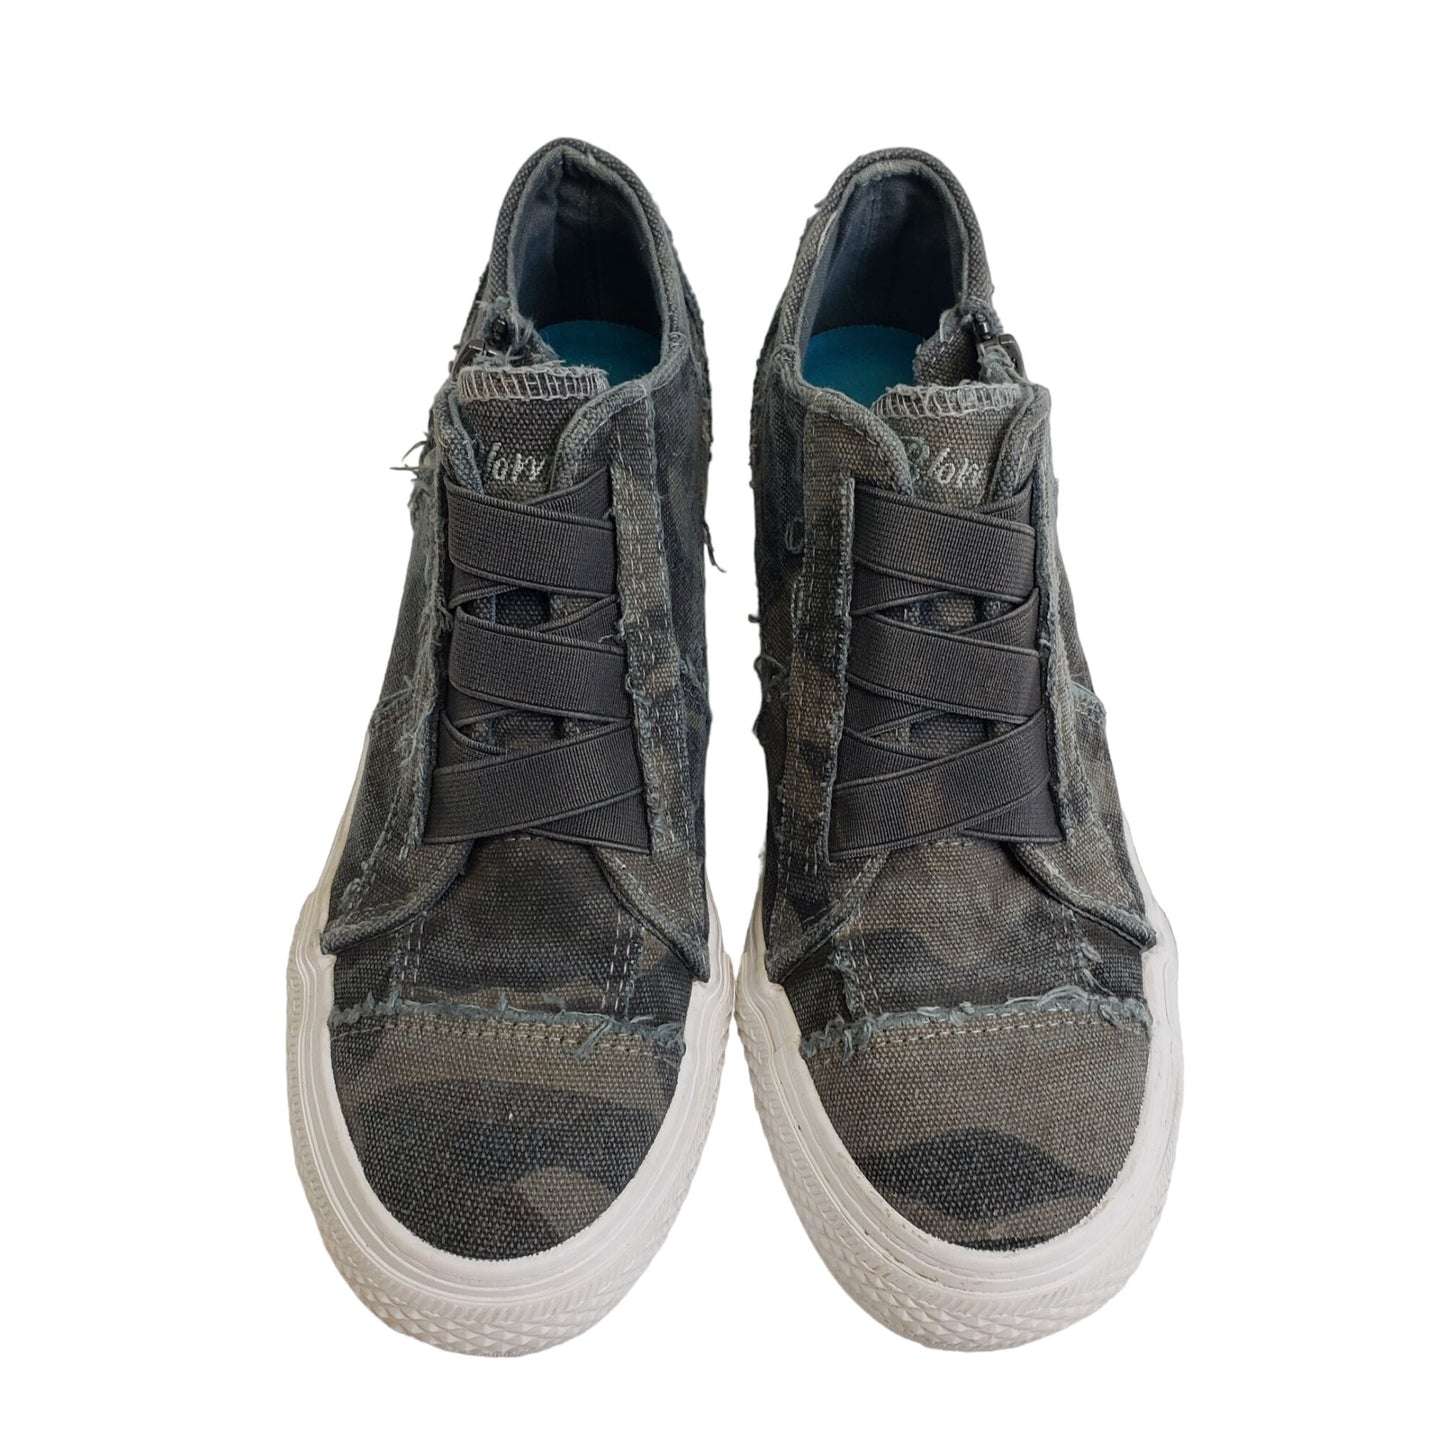 Blowfish Camouflage High Top Distressed Sneakers Size 6.5